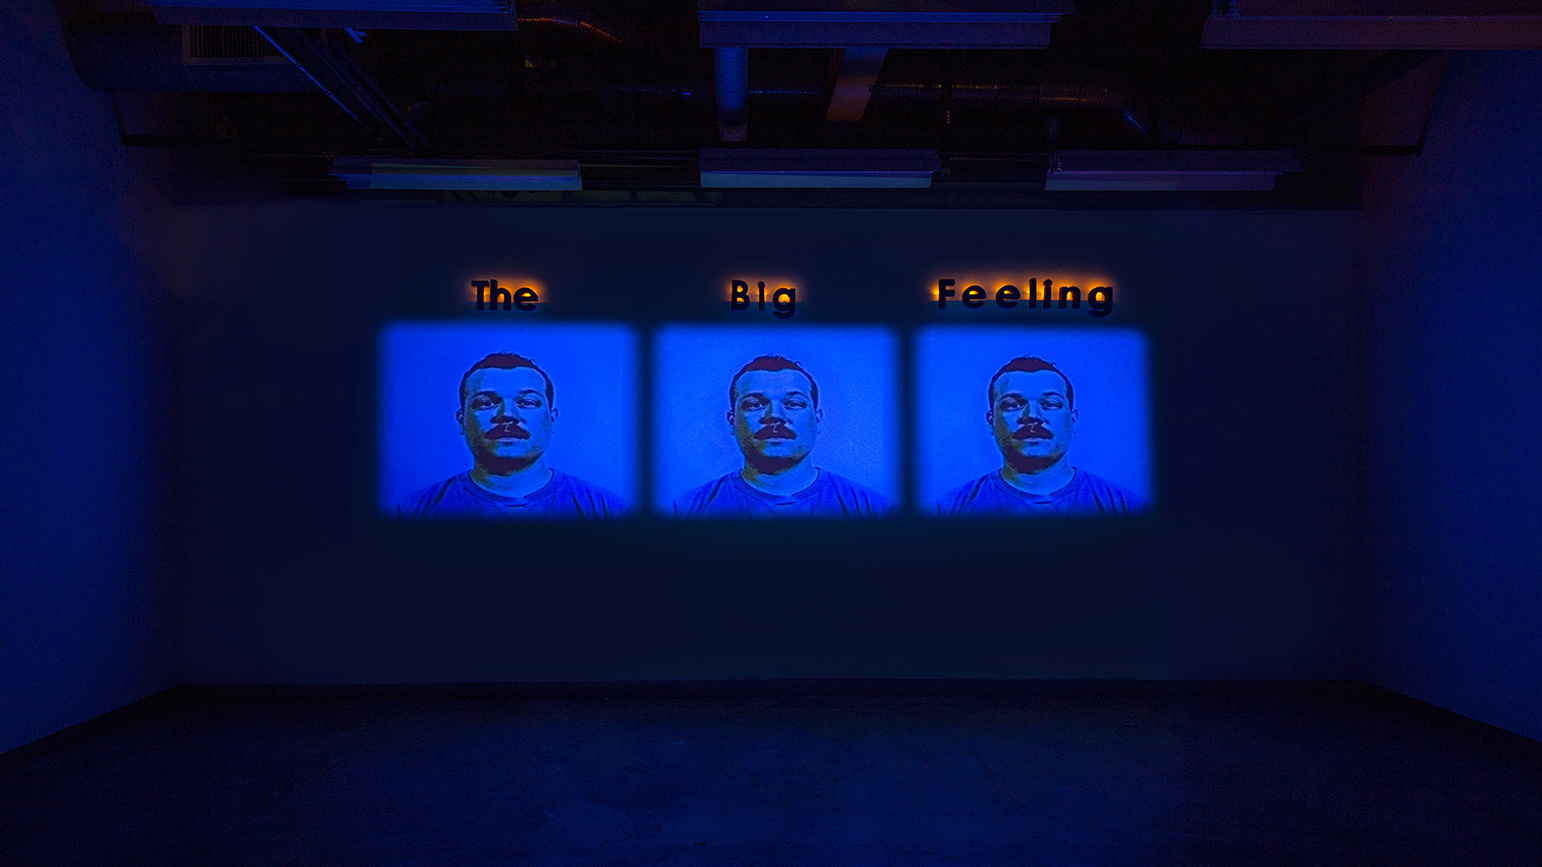 Three video projections showing the identical face with the works "The Big Feeling" above the projections